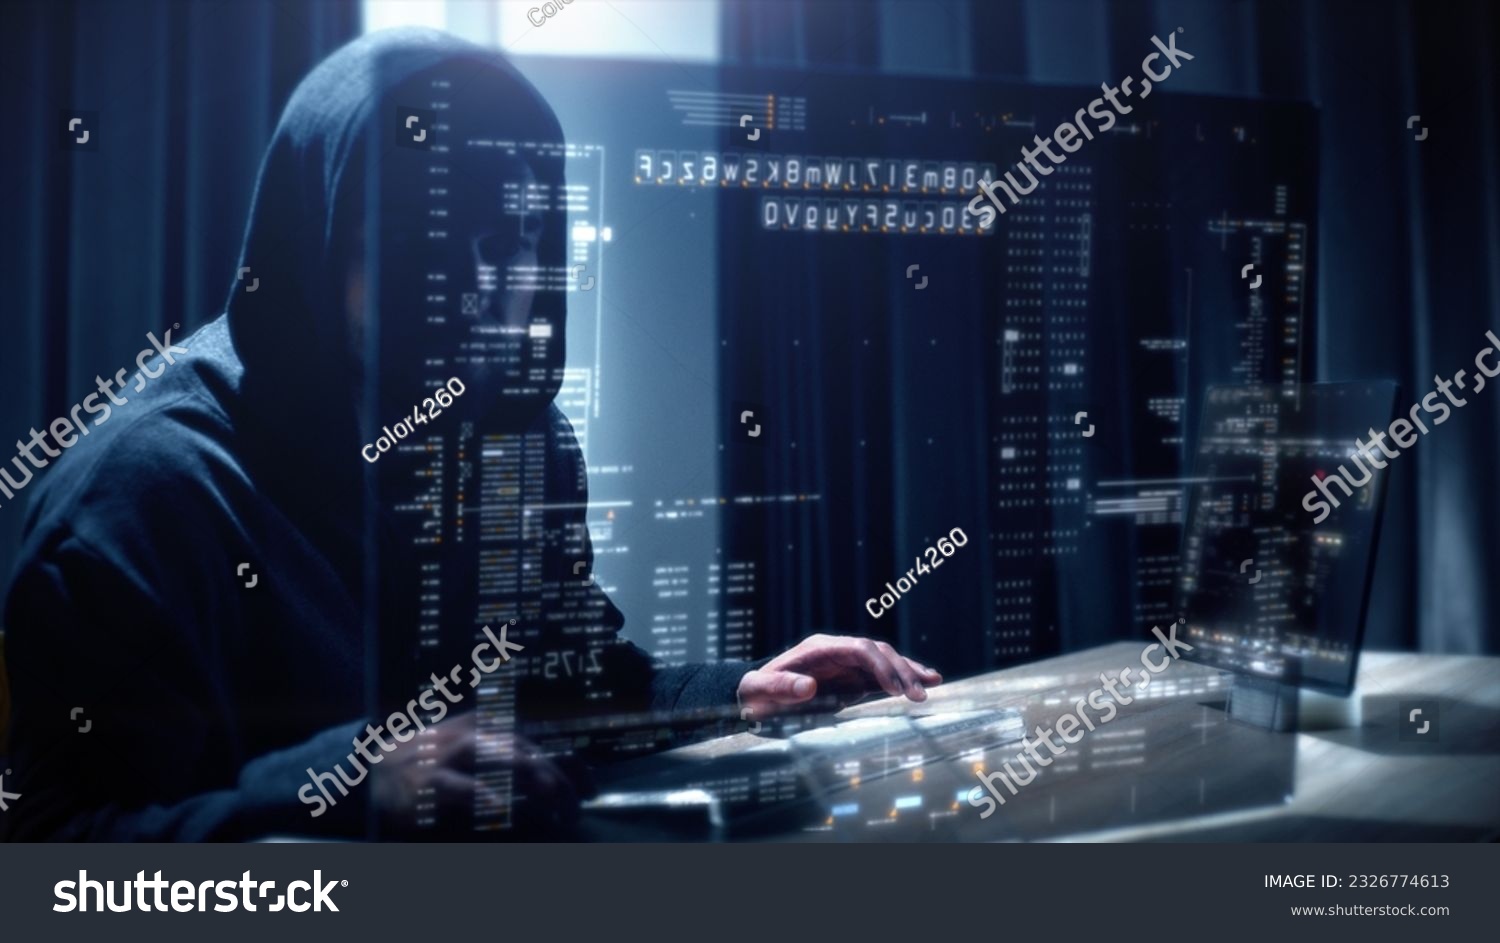 Futuristic cyber hacker operating under the guise of Anonymous, employs advanced algorithms to infiltrate cybersecurity systems and exploit vulnerabilities in password security. Concept : Cyber Hacker #2326774613